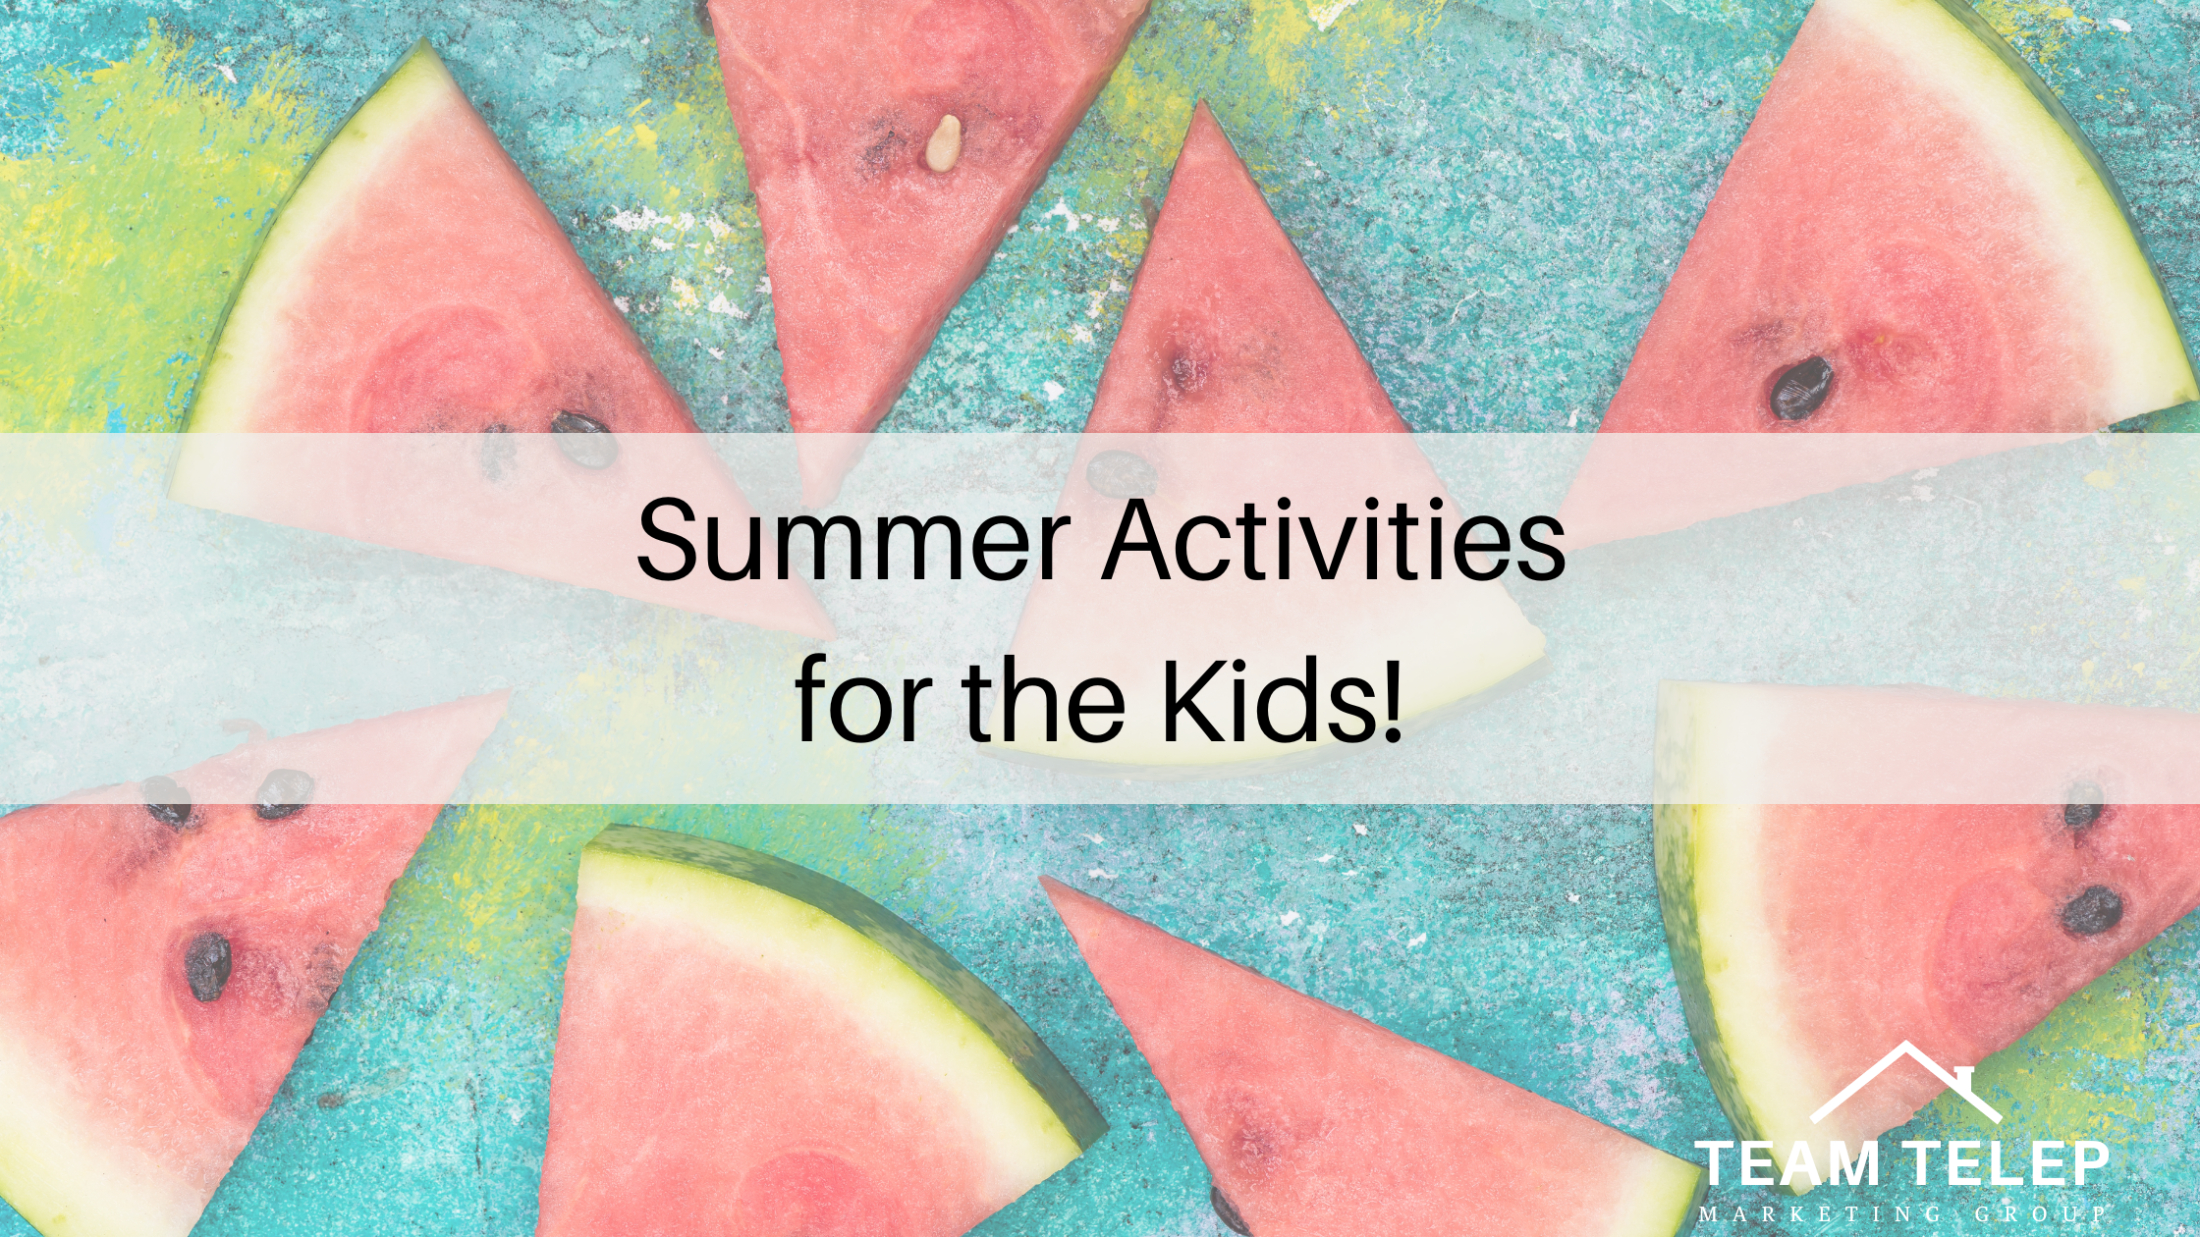 Summer Activities for the Kids